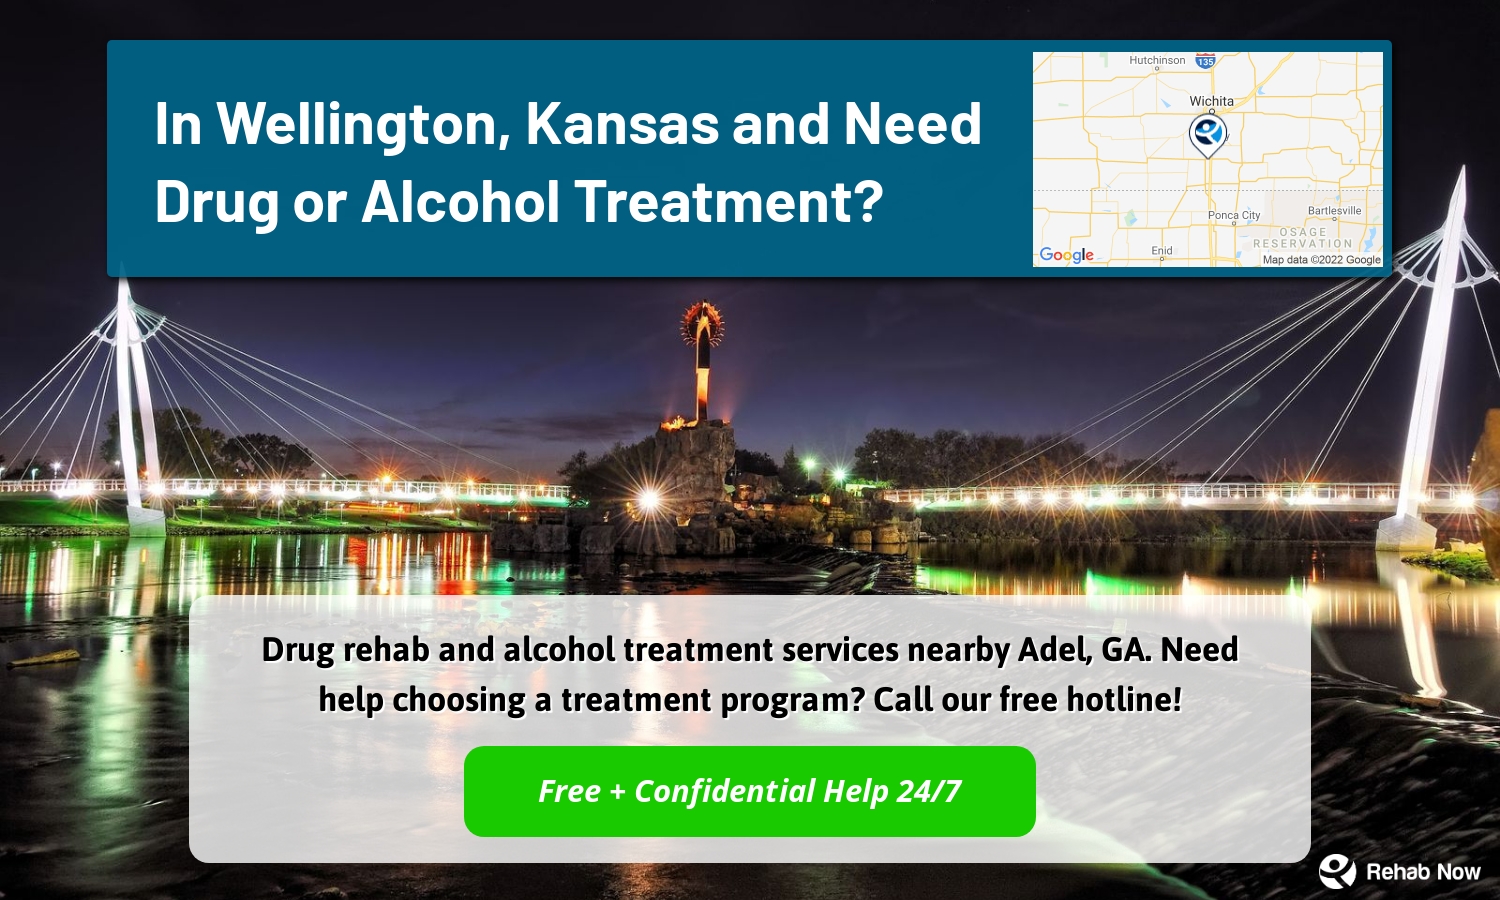 Drug rehab and alcohol treatment services nearby Adel, GA. Need help choosing a treatment program? Call our free hotline!